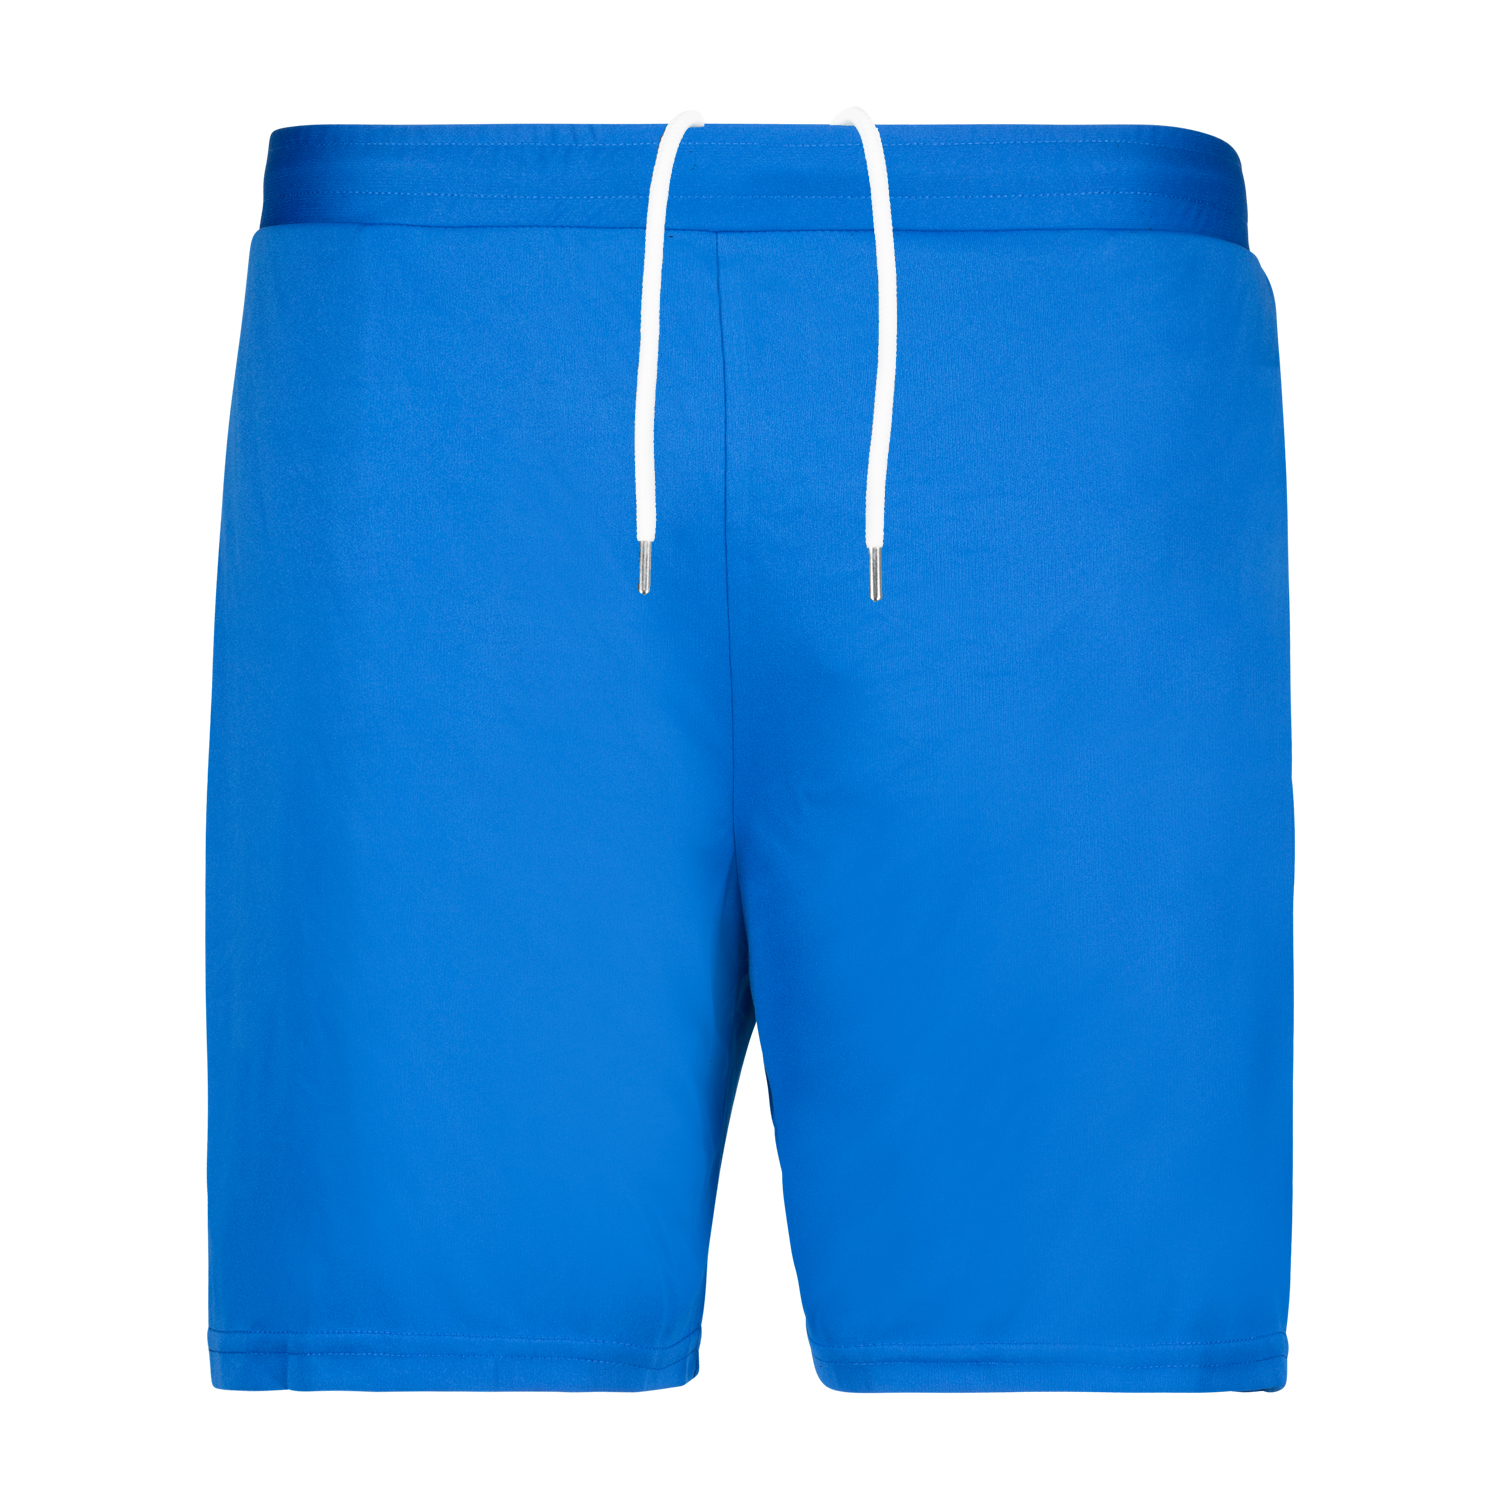 Functional shorts series Mario by Adamo in royal blue up to oversize 12XL